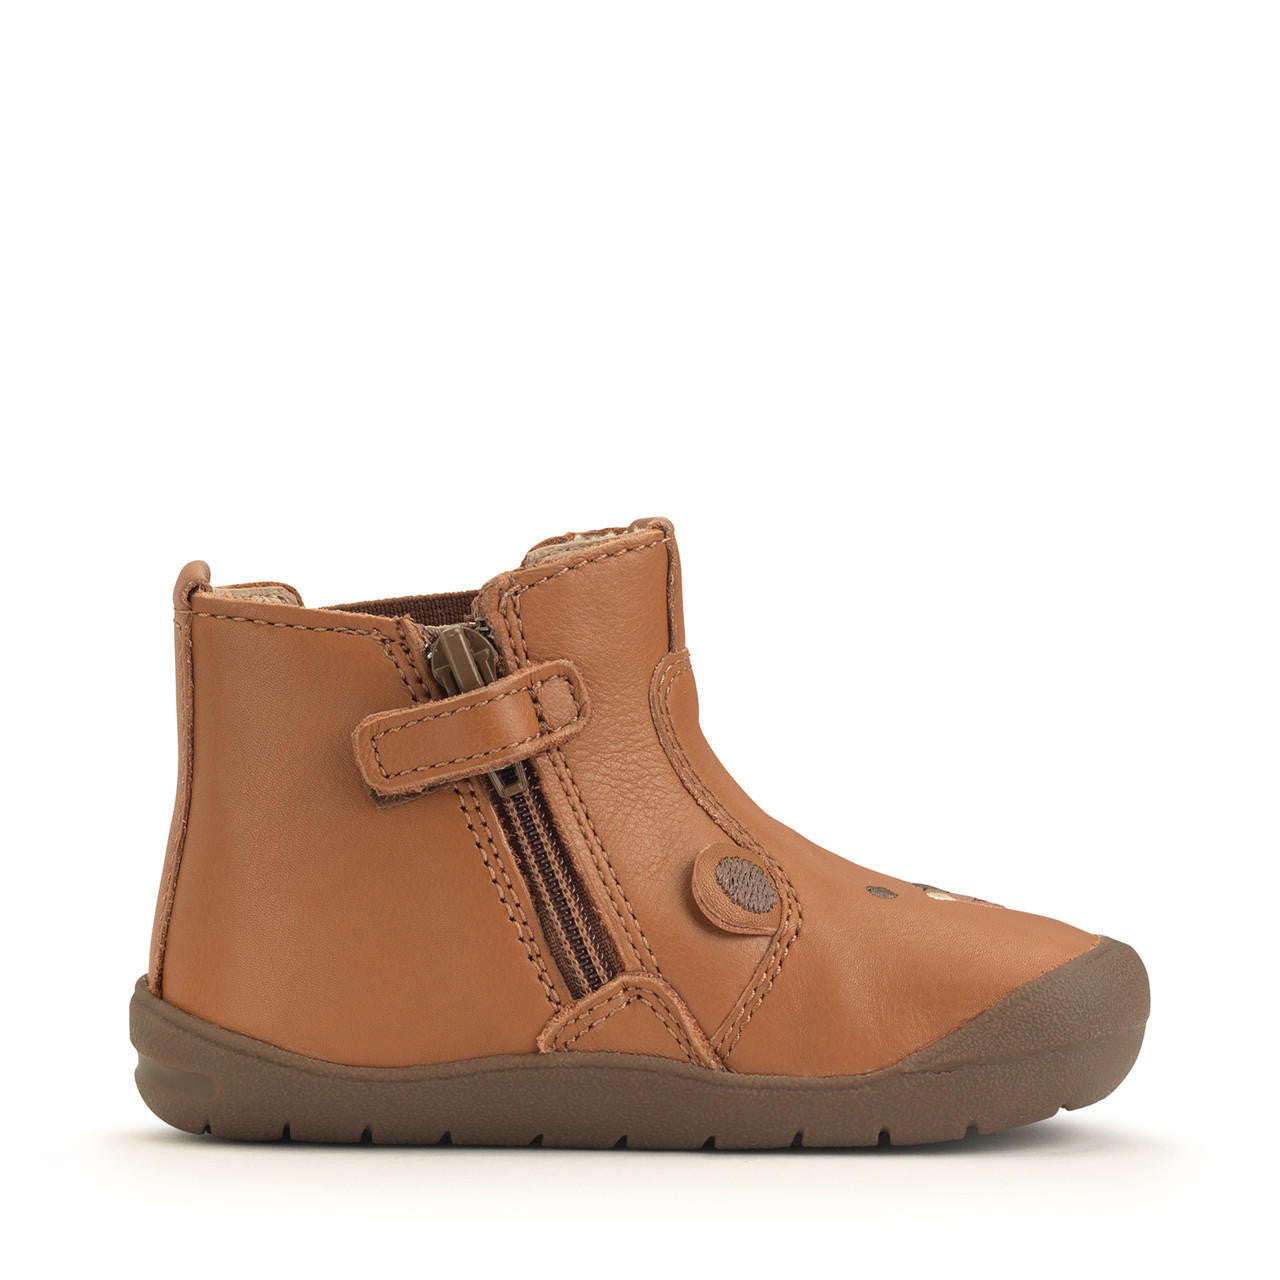 Rustle Tan Leather Bear Zip-up First Walking Boots